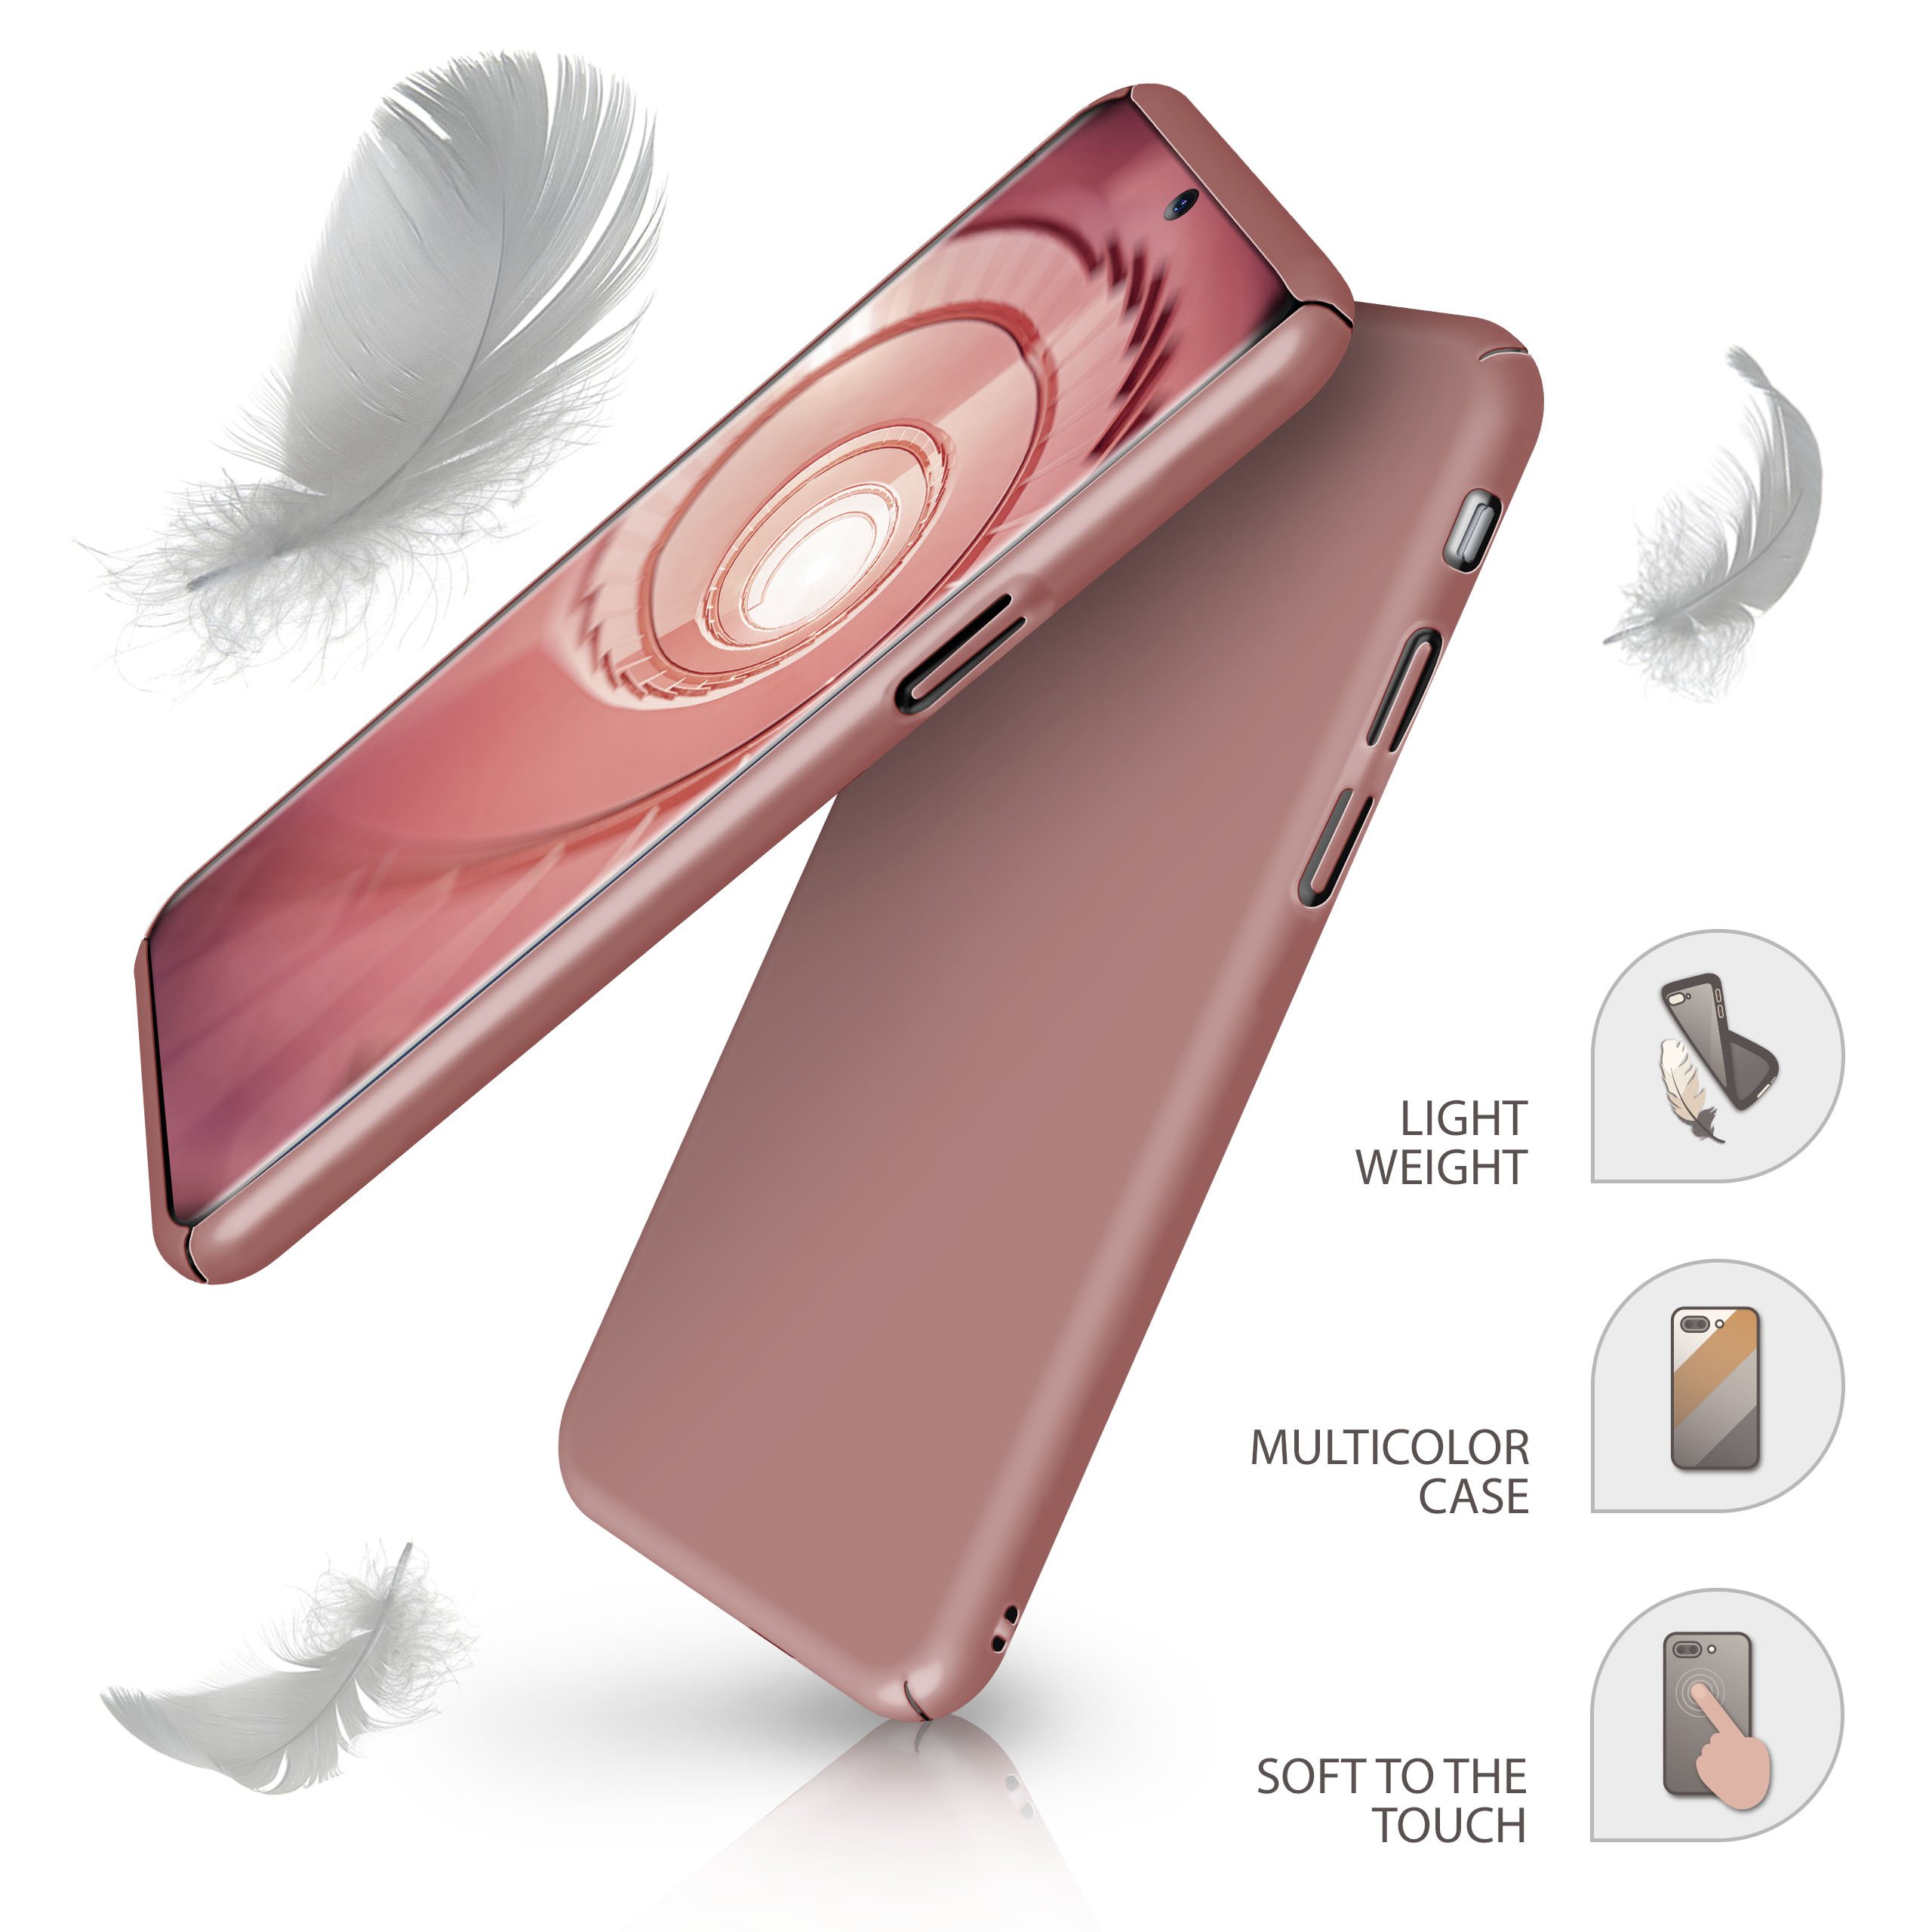 Alpha S20 / Galaxy Gold Plus Rose Case, 5G, MOEX Backcover, Samsung,